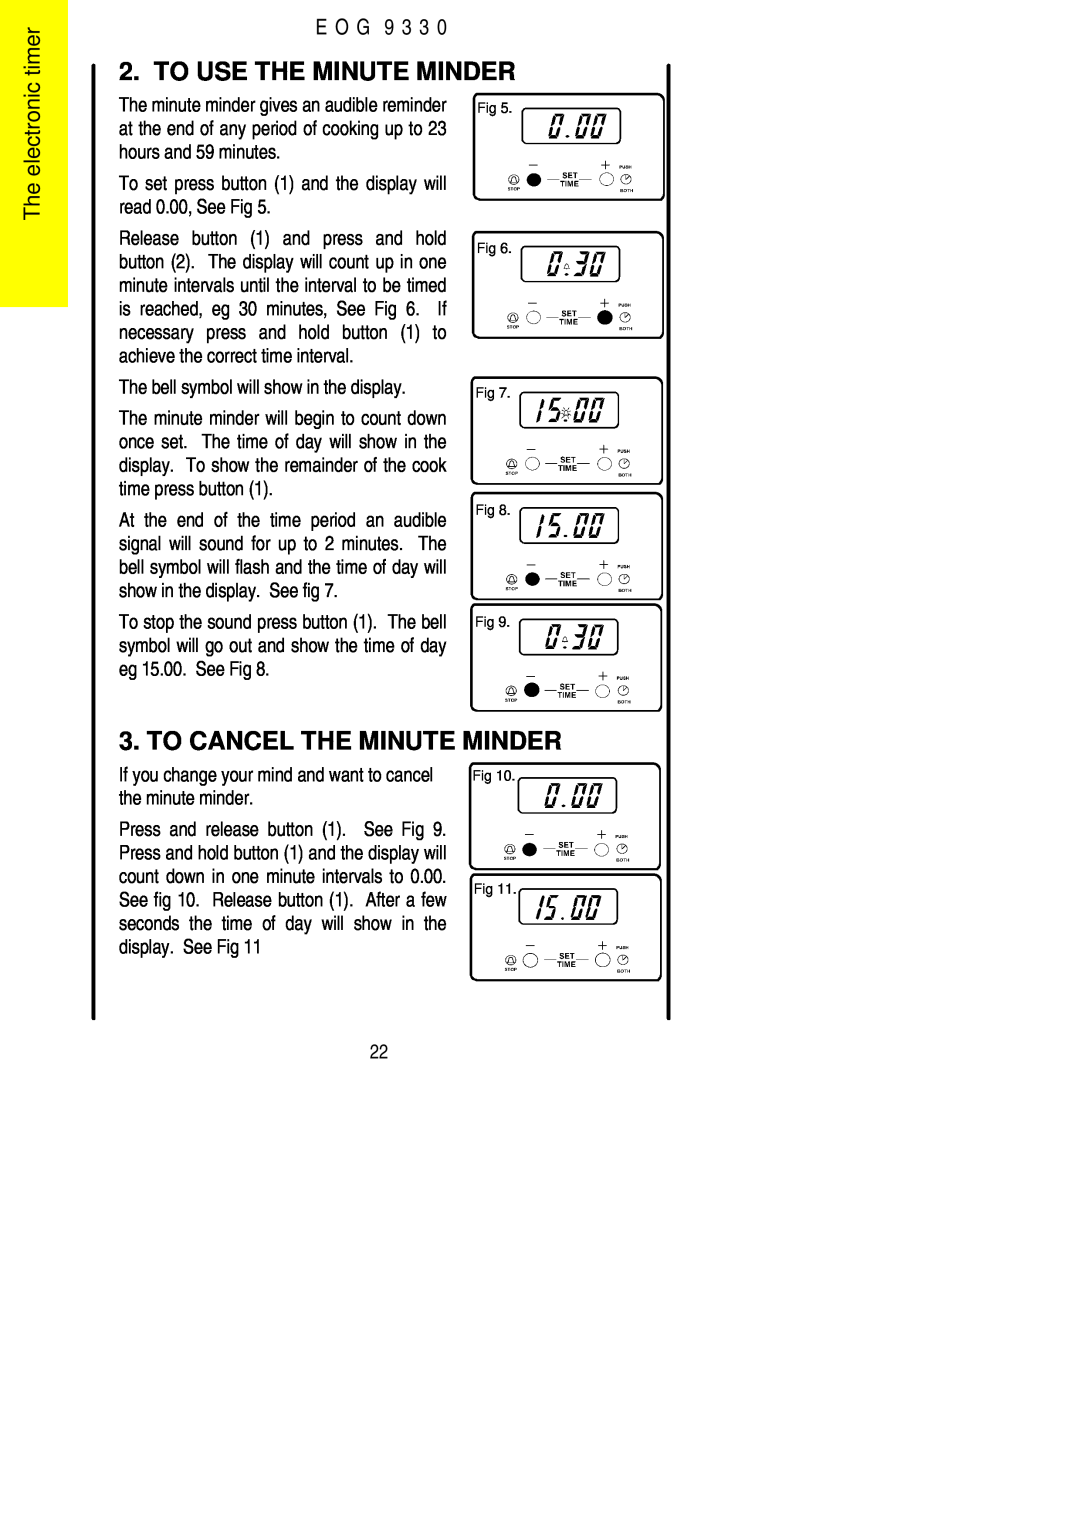 Electrolux EOG9330 manual To Use The Minute Minder, To Cancel The Minute Minder, The electronic timer, E O G 